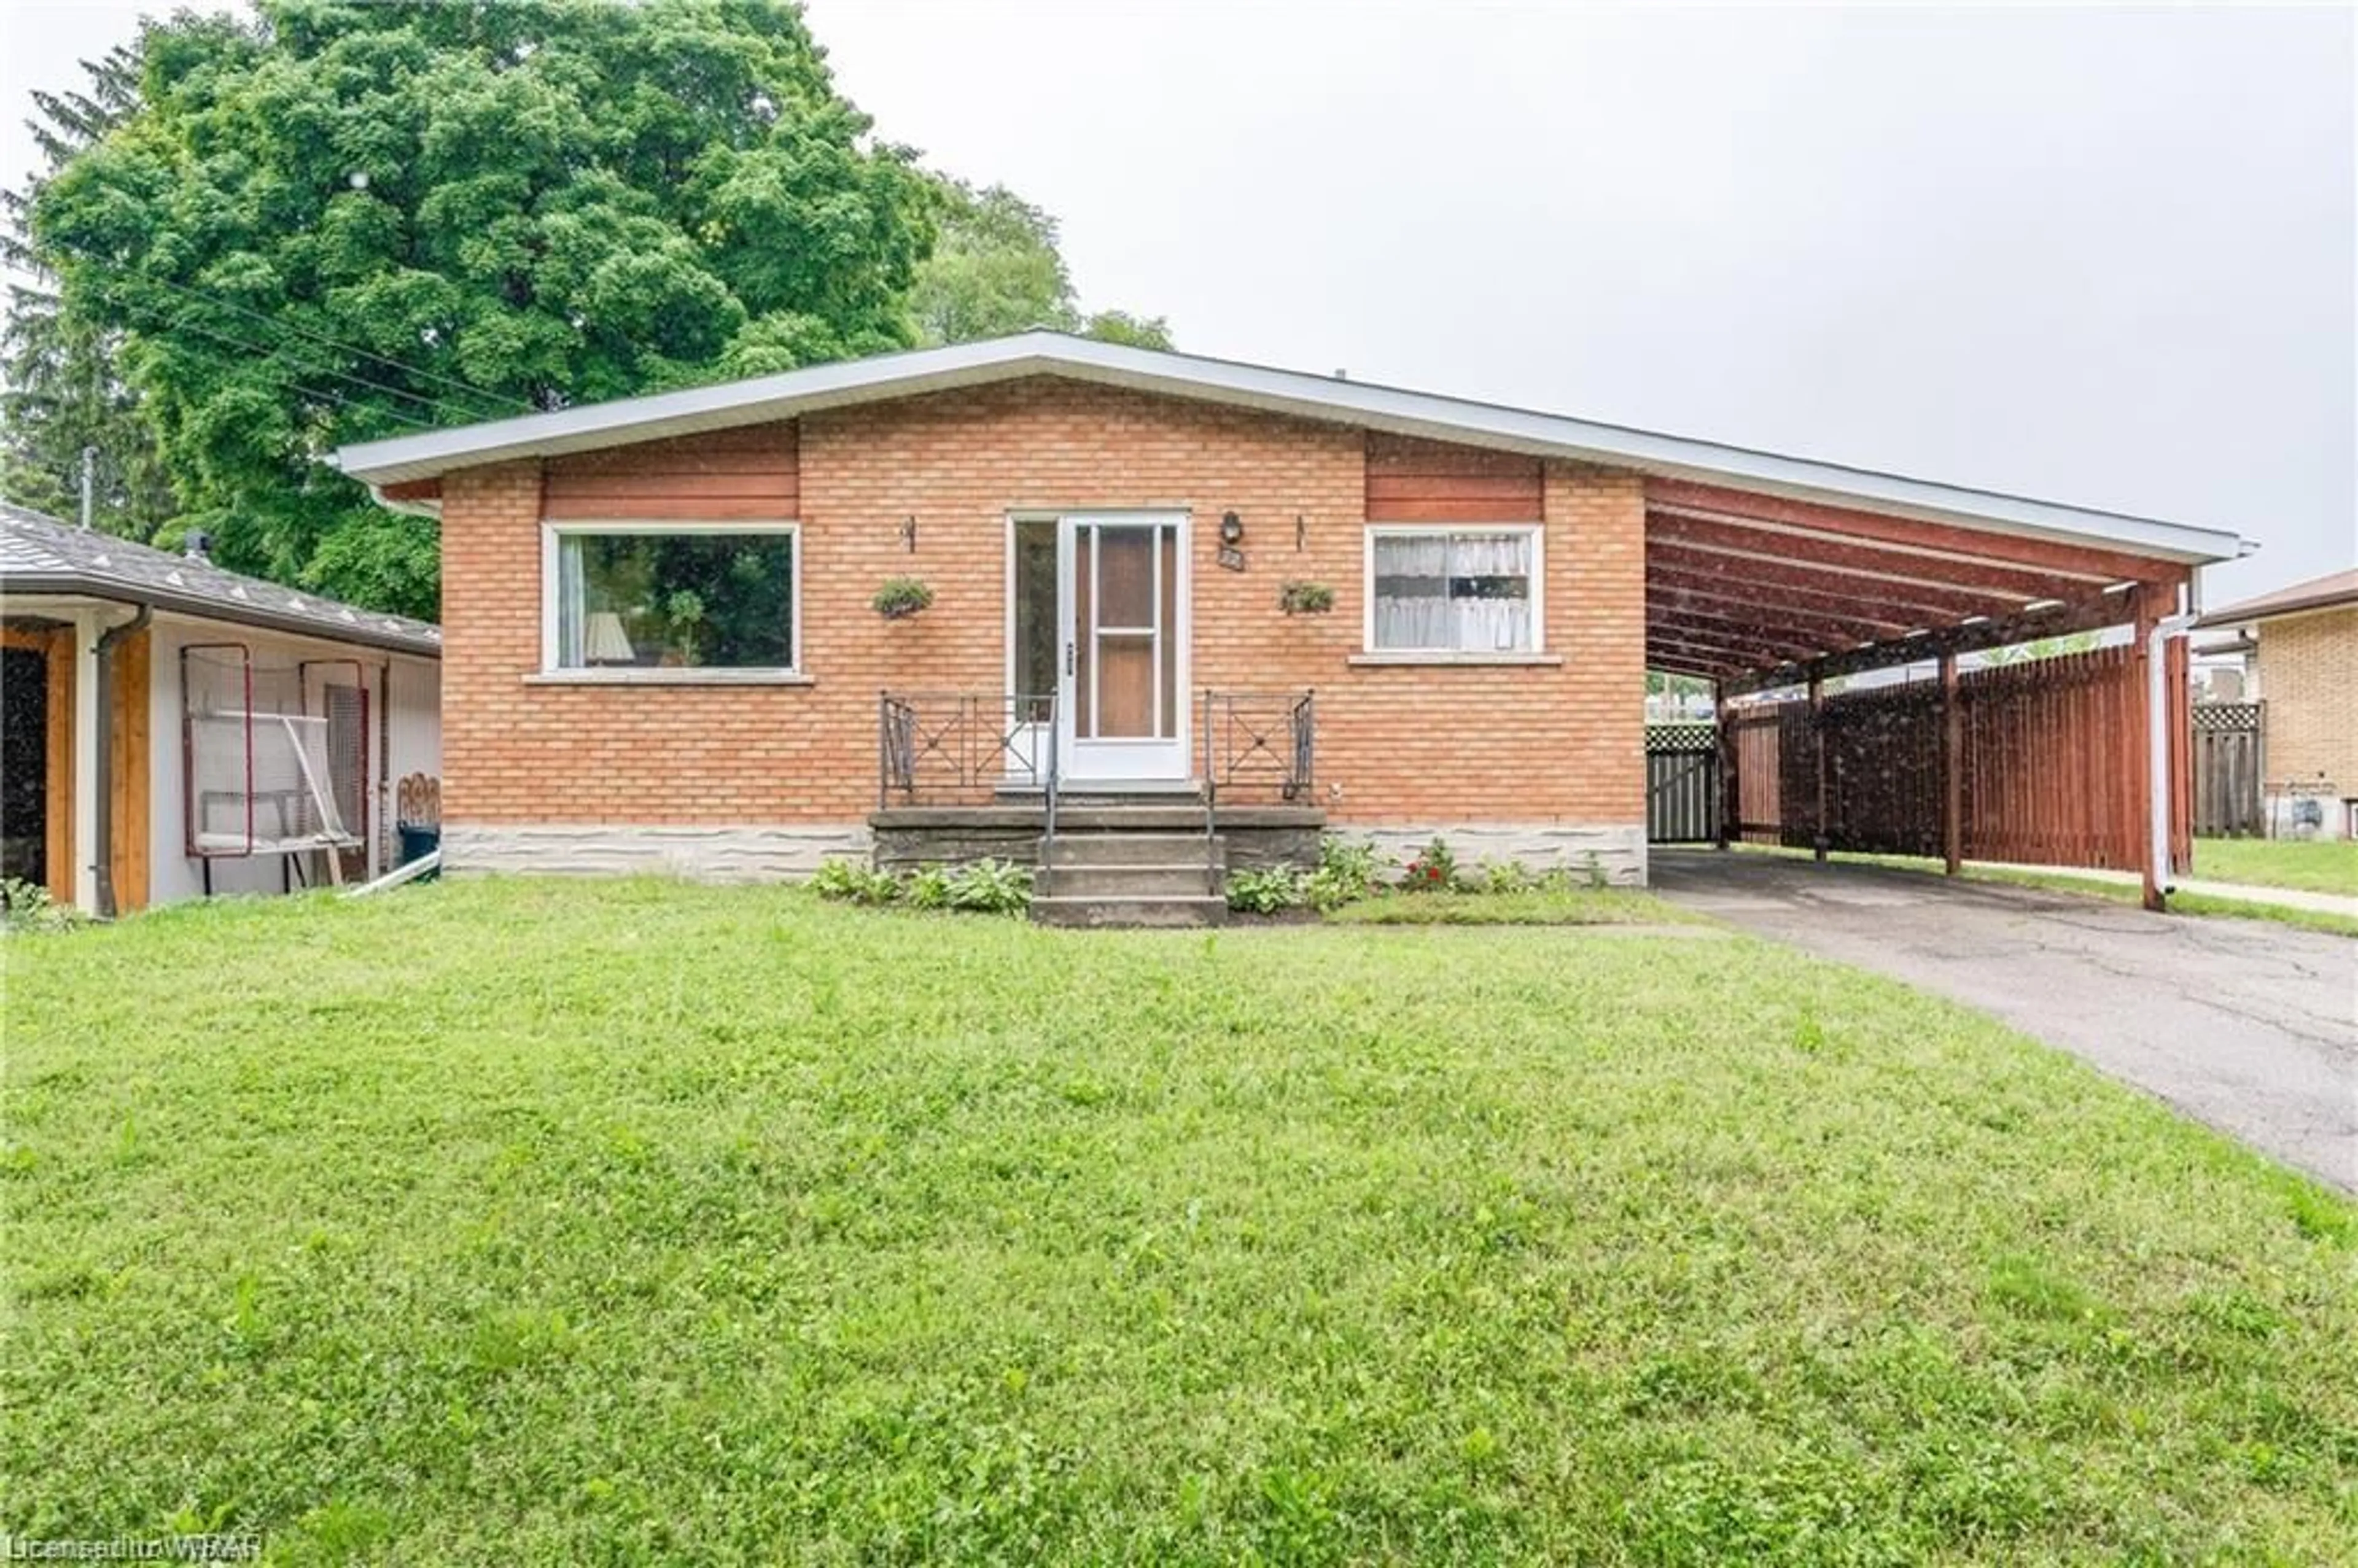 Home with brick exterior material for 72 Massey Ave, Kitchener Ontario N2C 1M3